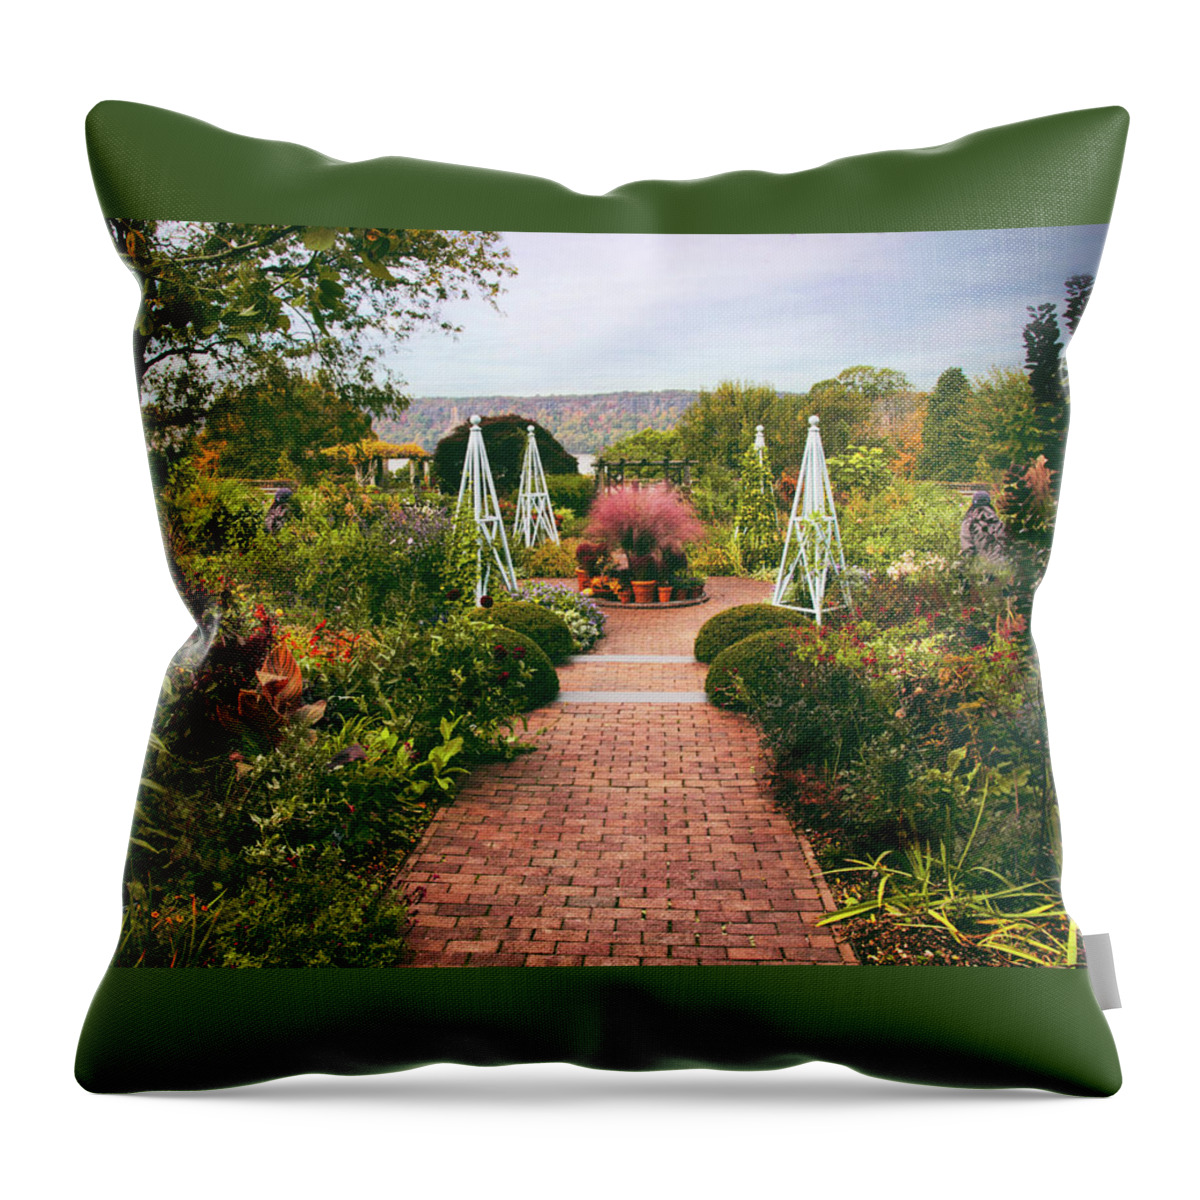 Wave Hill Throw Pillow featuring the photograph Wave Hill Garden by Jessica Jenney